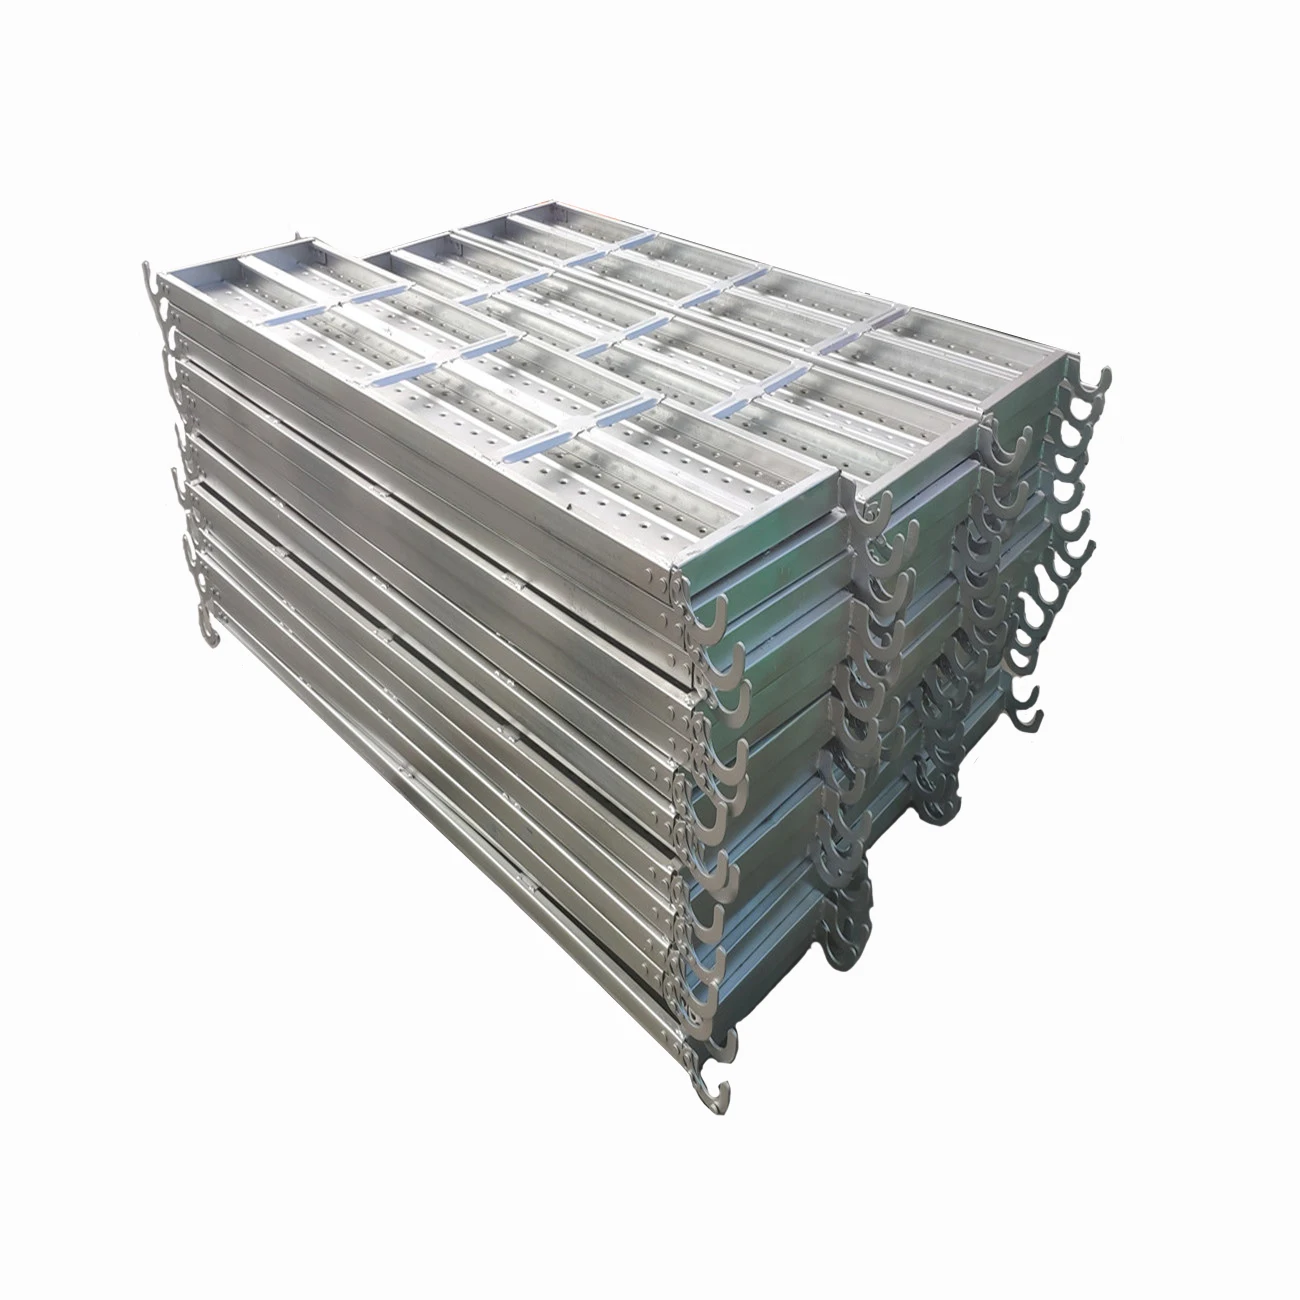 
G Galvanized painted scaffolding and prop perforated steel catwalk plank with hook metal scaffold plank scaffold steel plank  (62216594998)